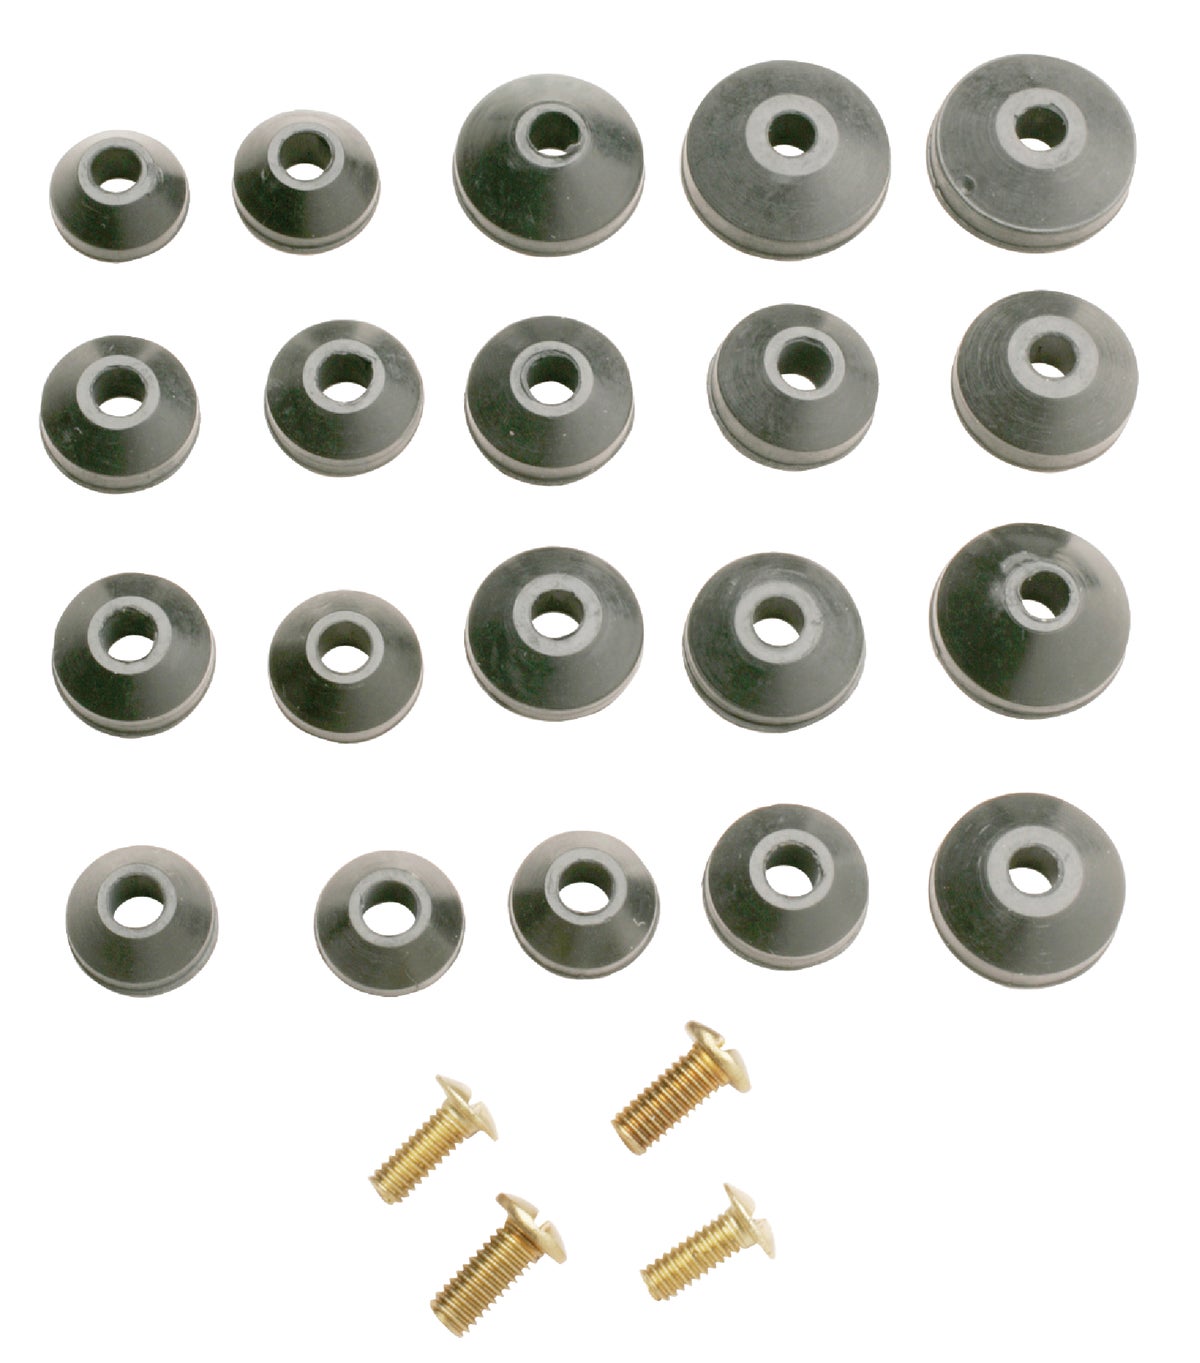 Do it Flat Faucet Washer 20 Assorted Faucet Washers & 4 Brass Screws 